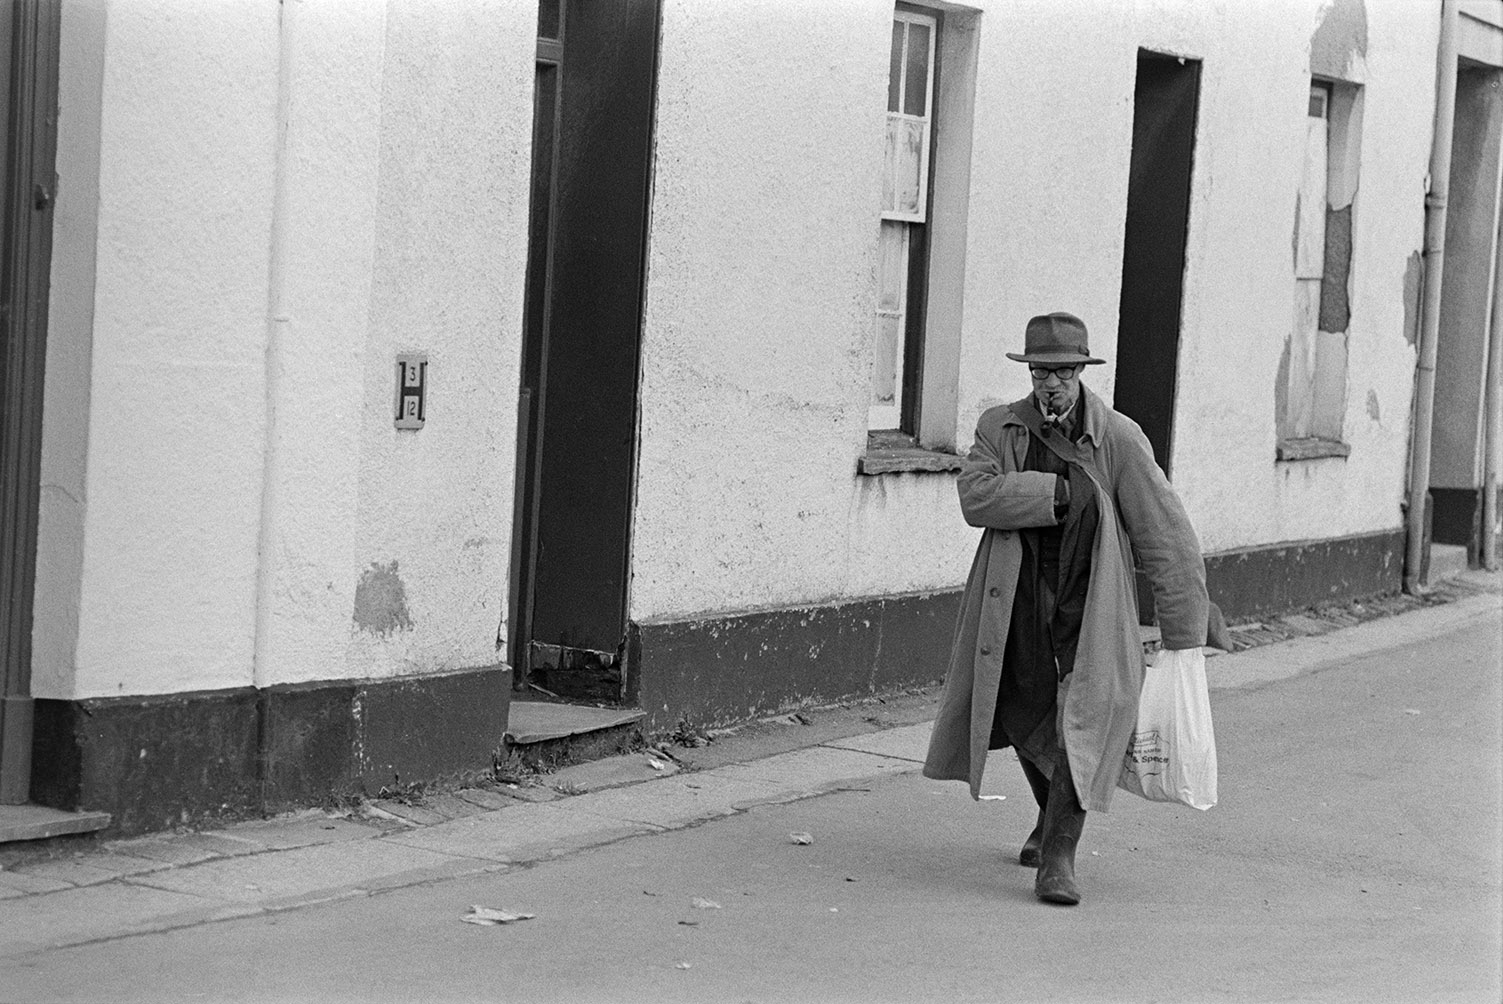 A man walking down a street in Barnstaple. He is smoking a pipe and holding a carrier bag.